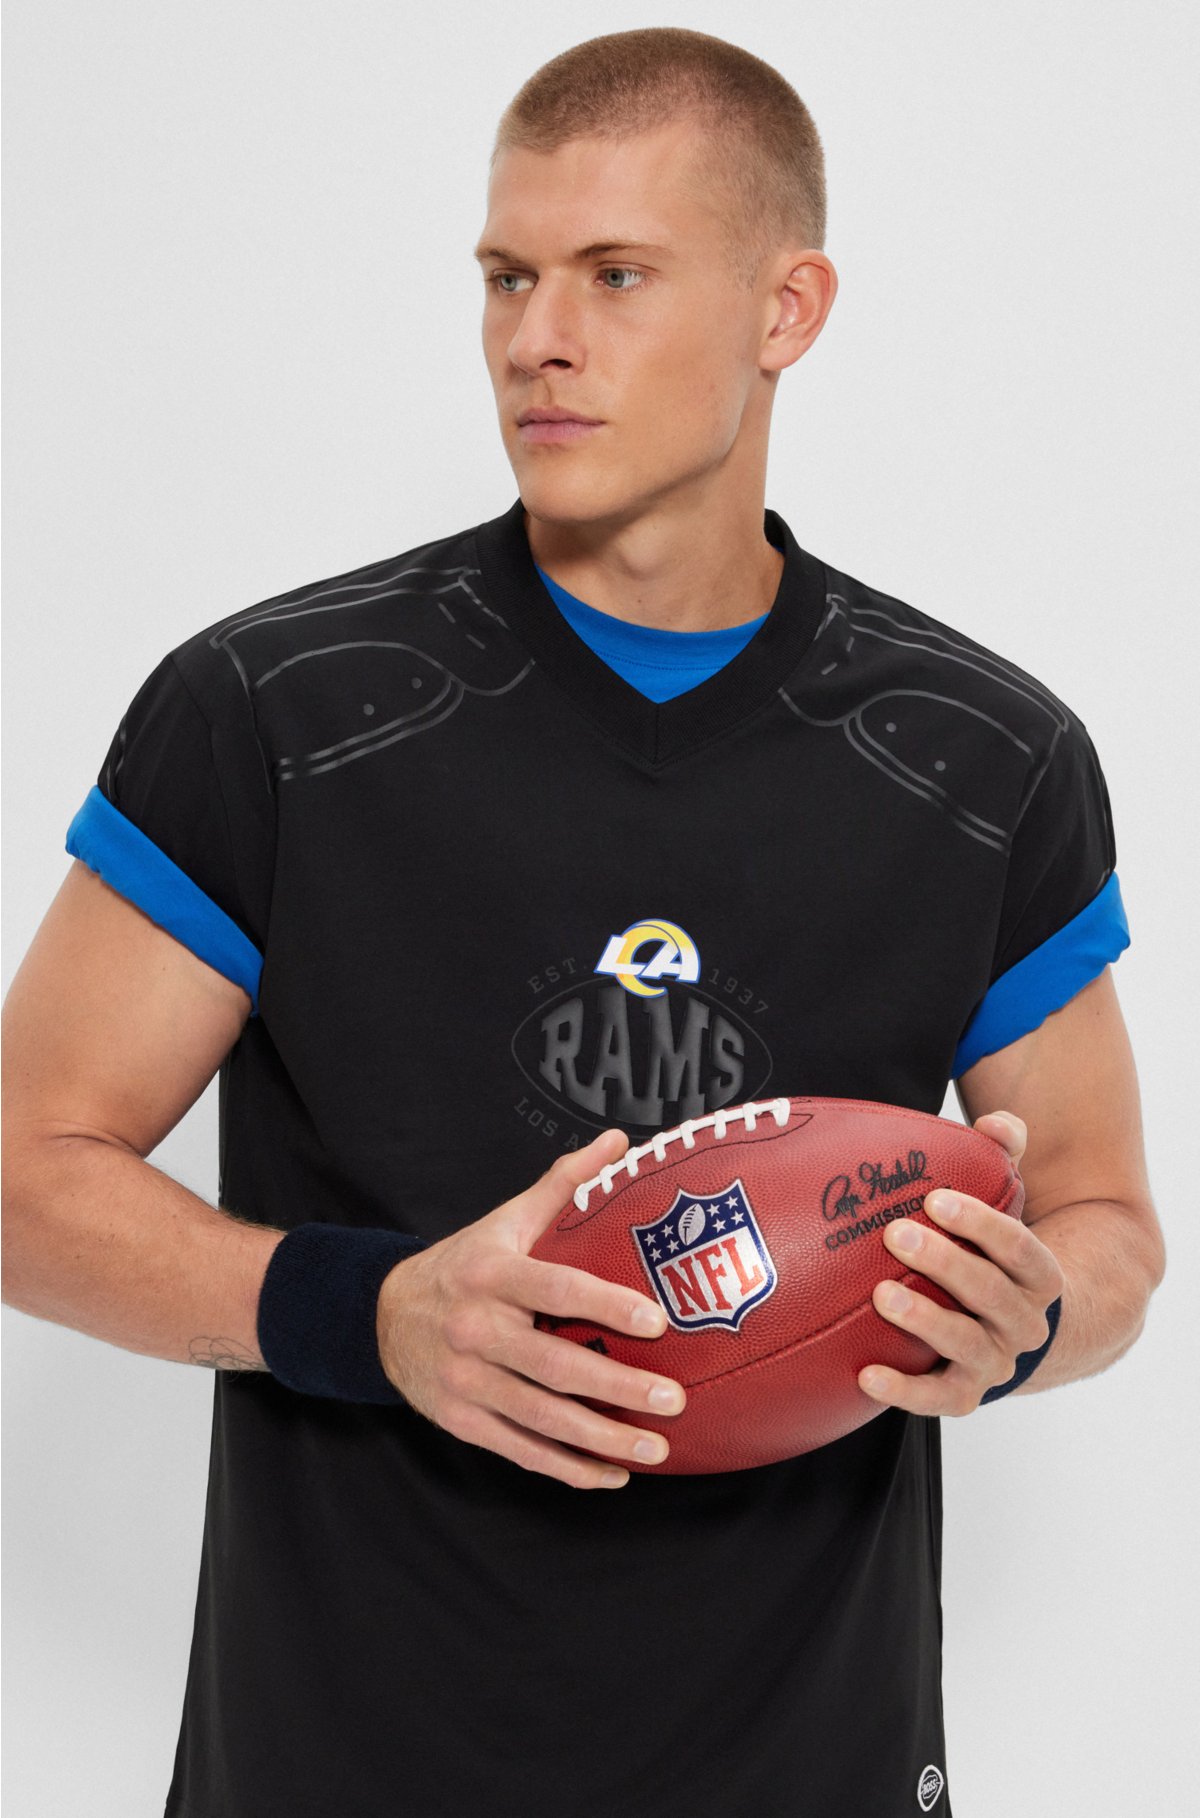 BOSS x NFL oversize-fit T-shirt with collaborative branding, Rams